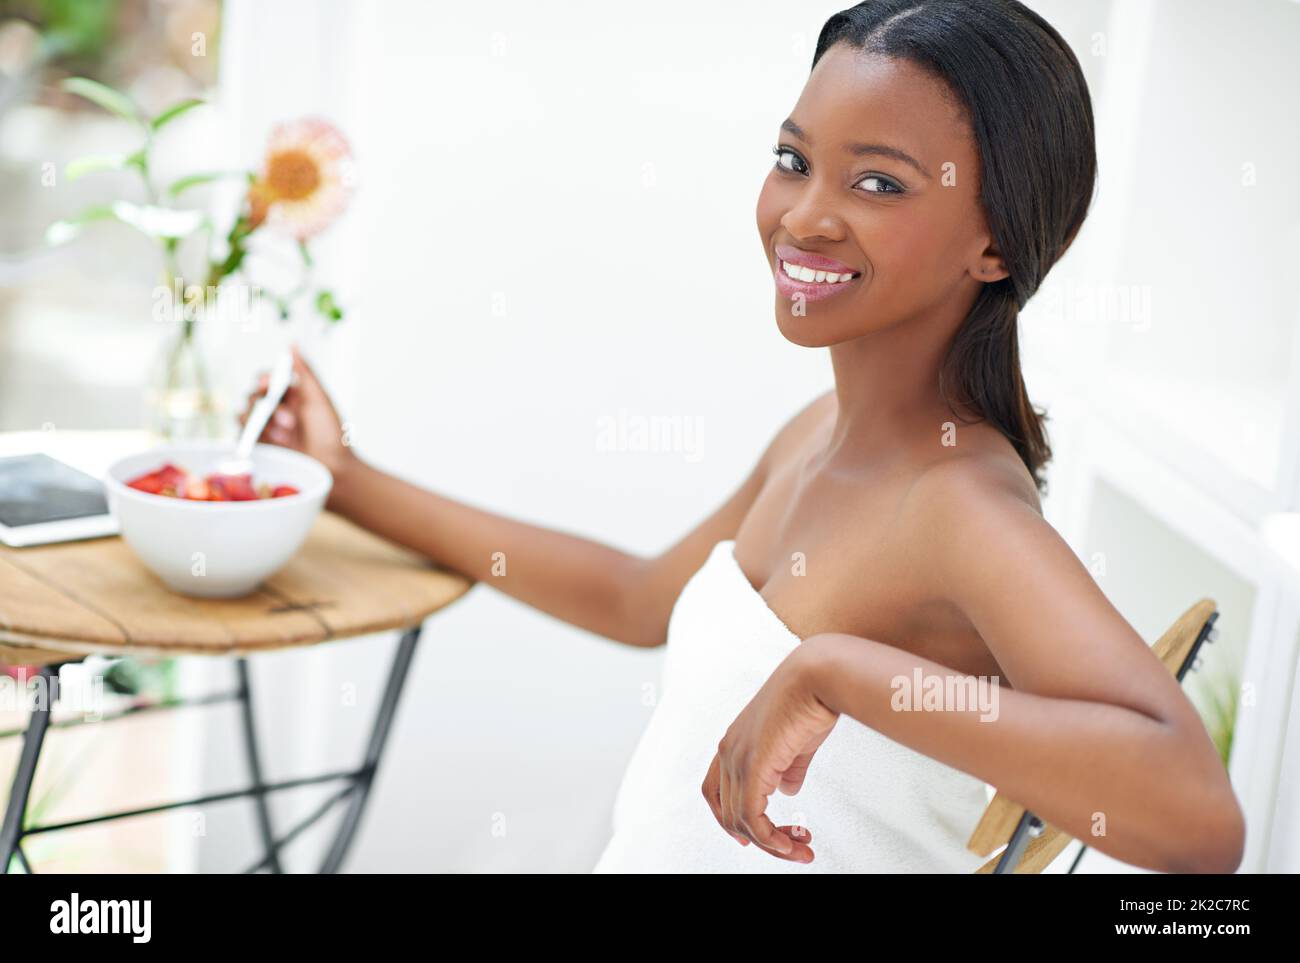 This is the only way to live. Shot of a beautiful young woman eating a bowl of strawberries. Stock Photo